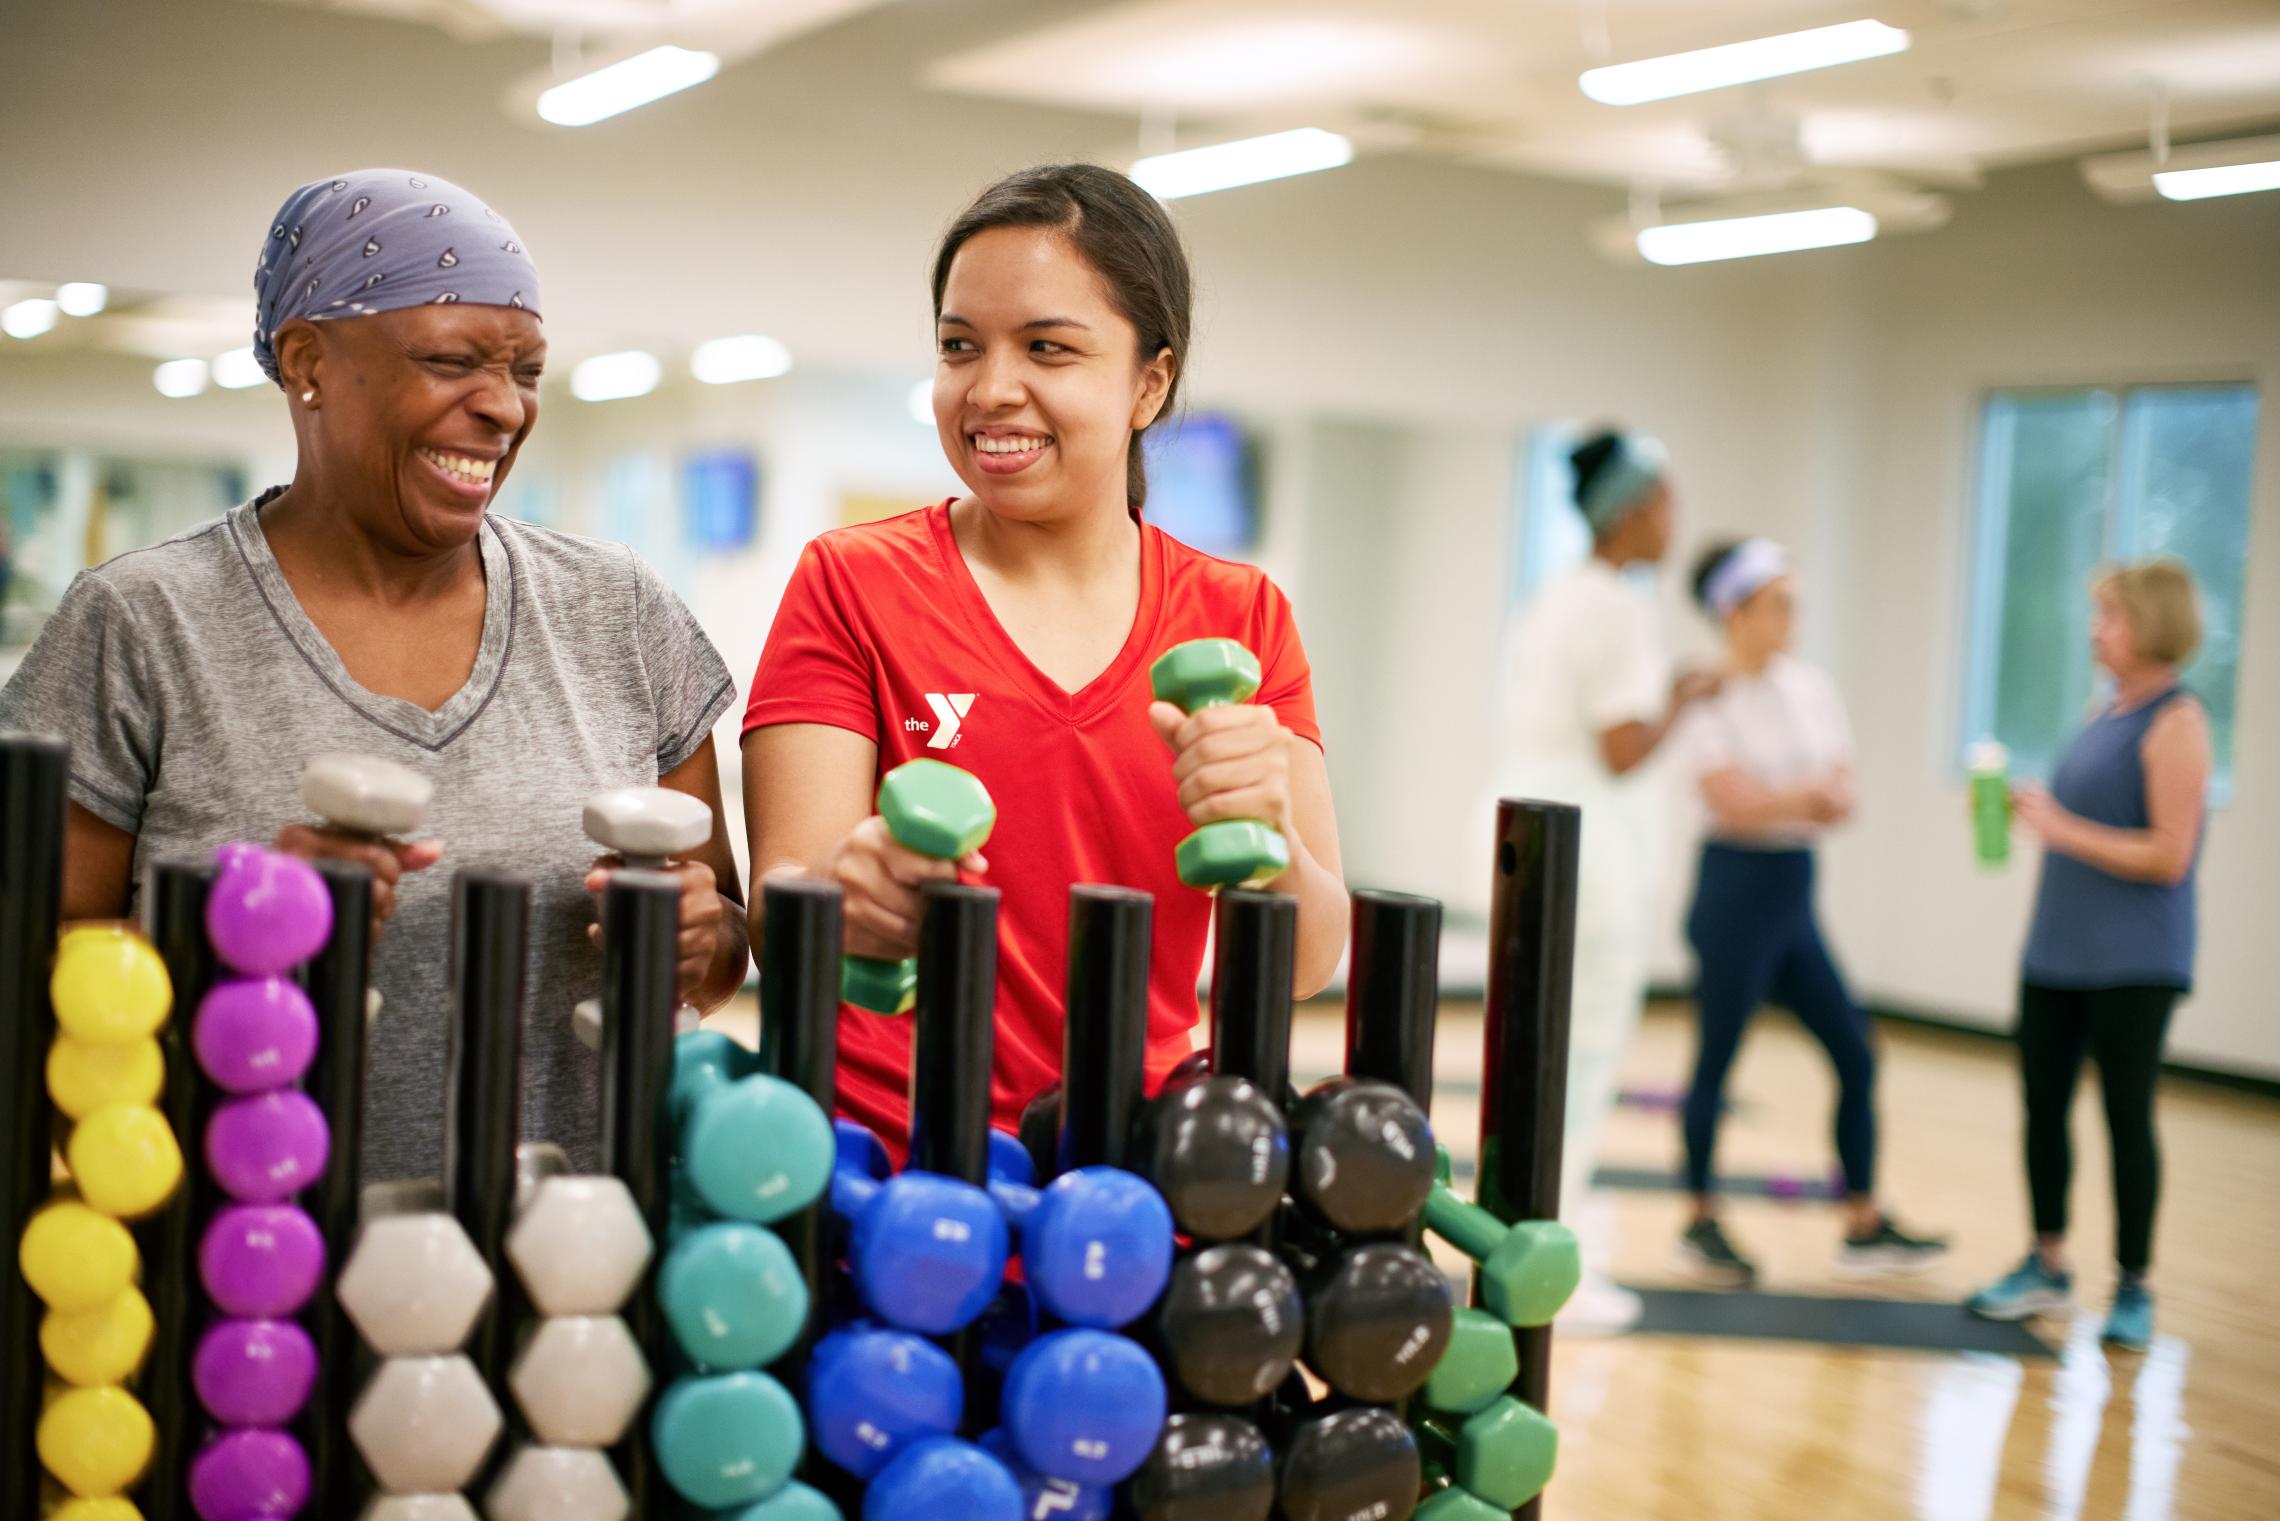 Group exercise participant selects dumbbells for a workout at the YMCA